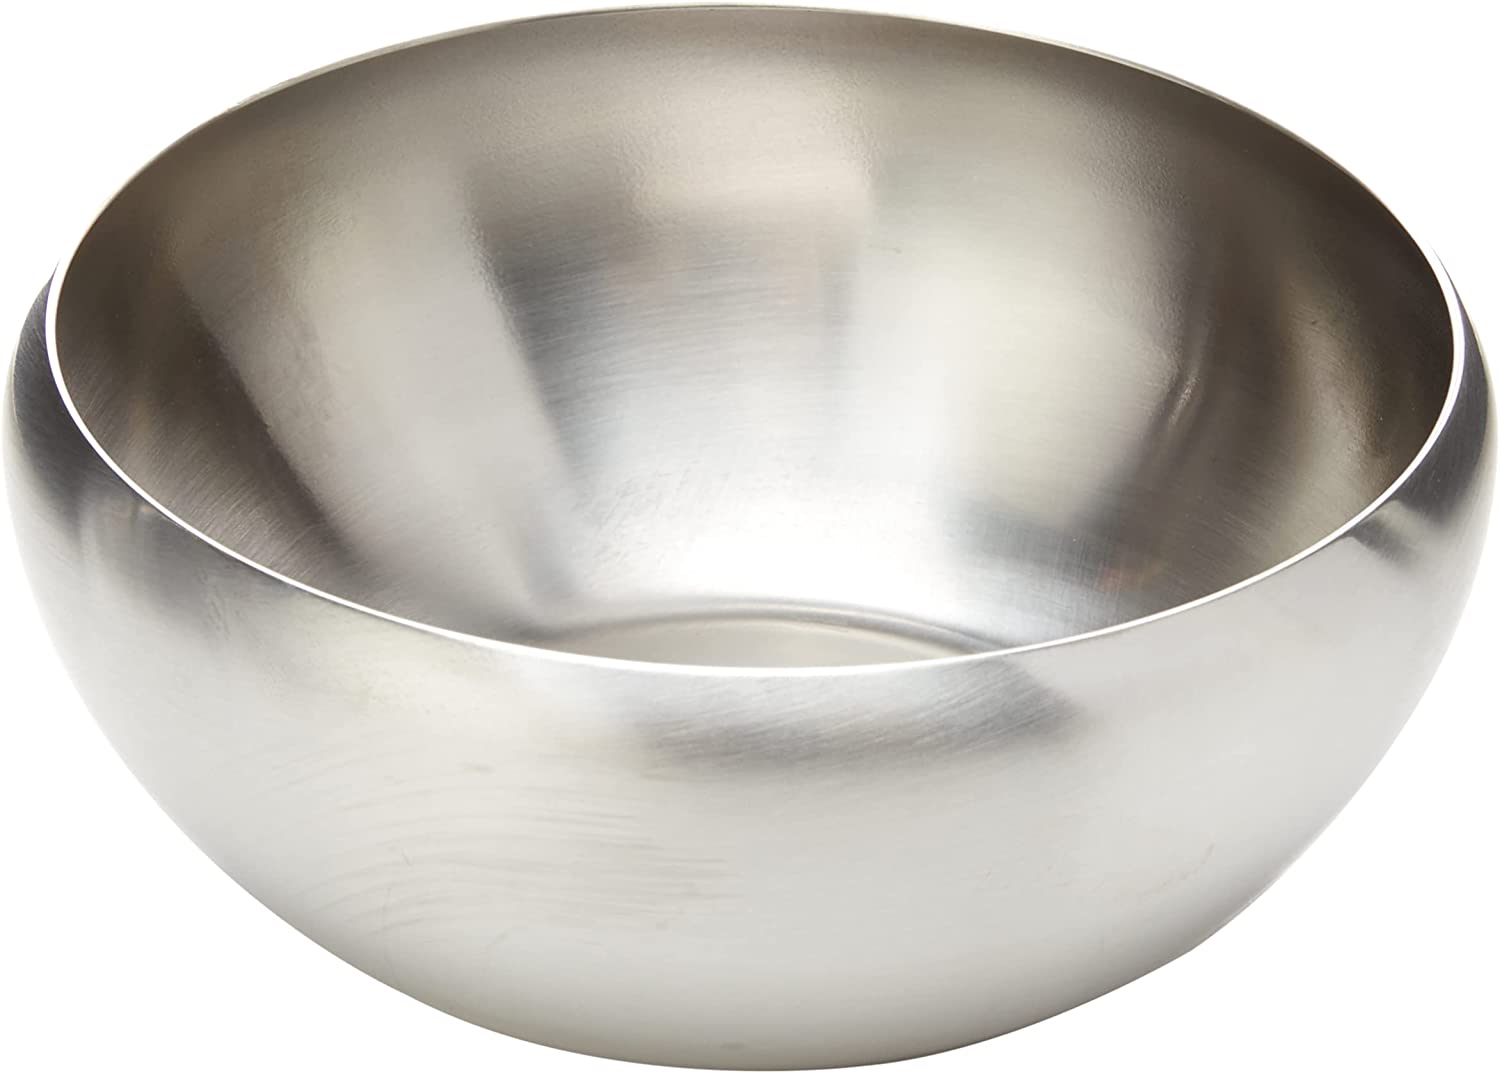 Alessi 12 cm Dessert Bowl in 18/10 Stainless Steel Mat, Set of 6